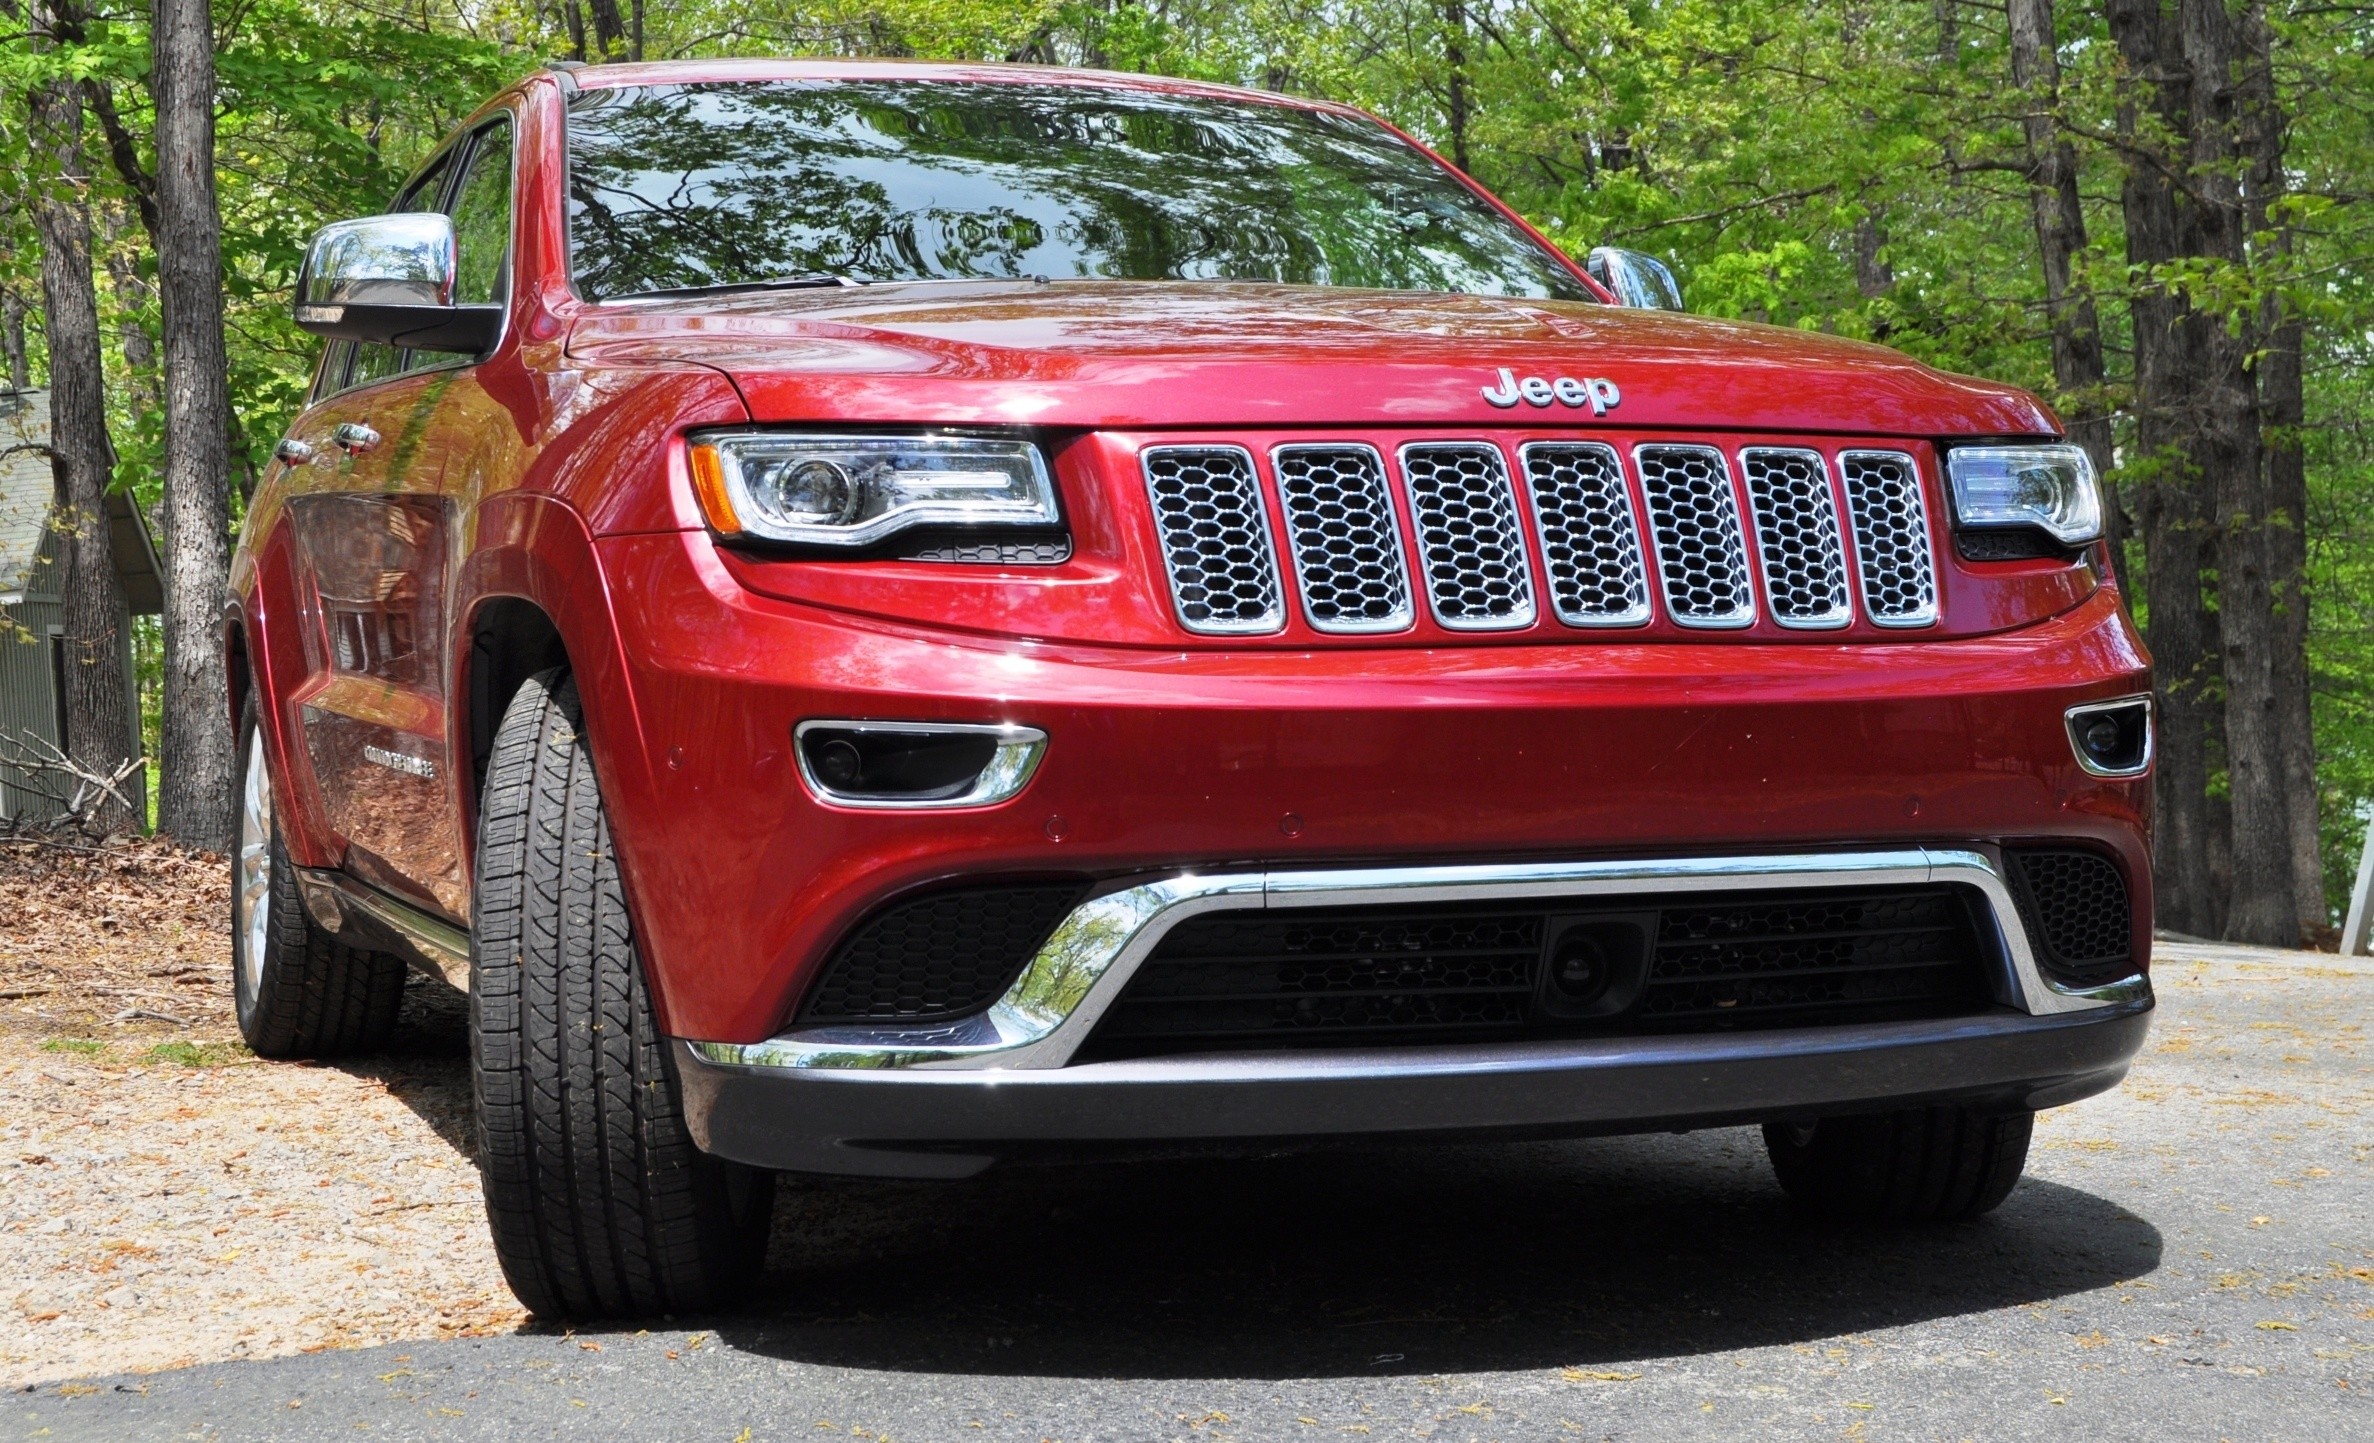 HD Video Road Test Review 2014 Jeep Grand Cherokee